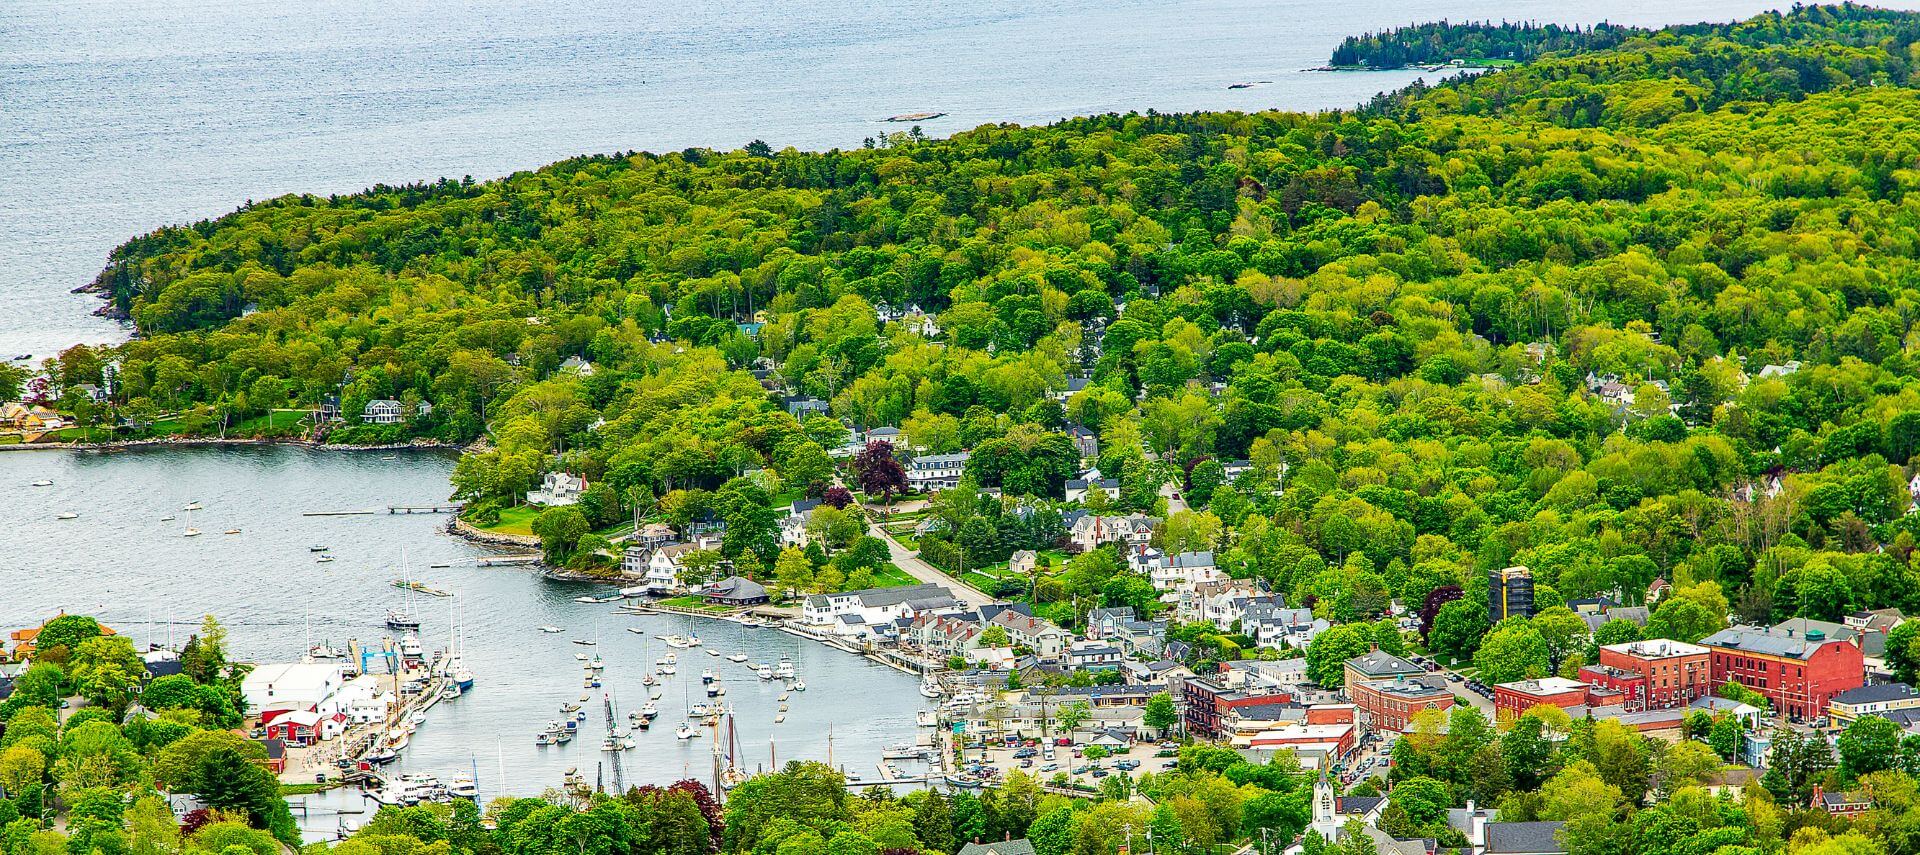 town of camden, maine from above. Lots of green trees against the water of the atlantic ocean